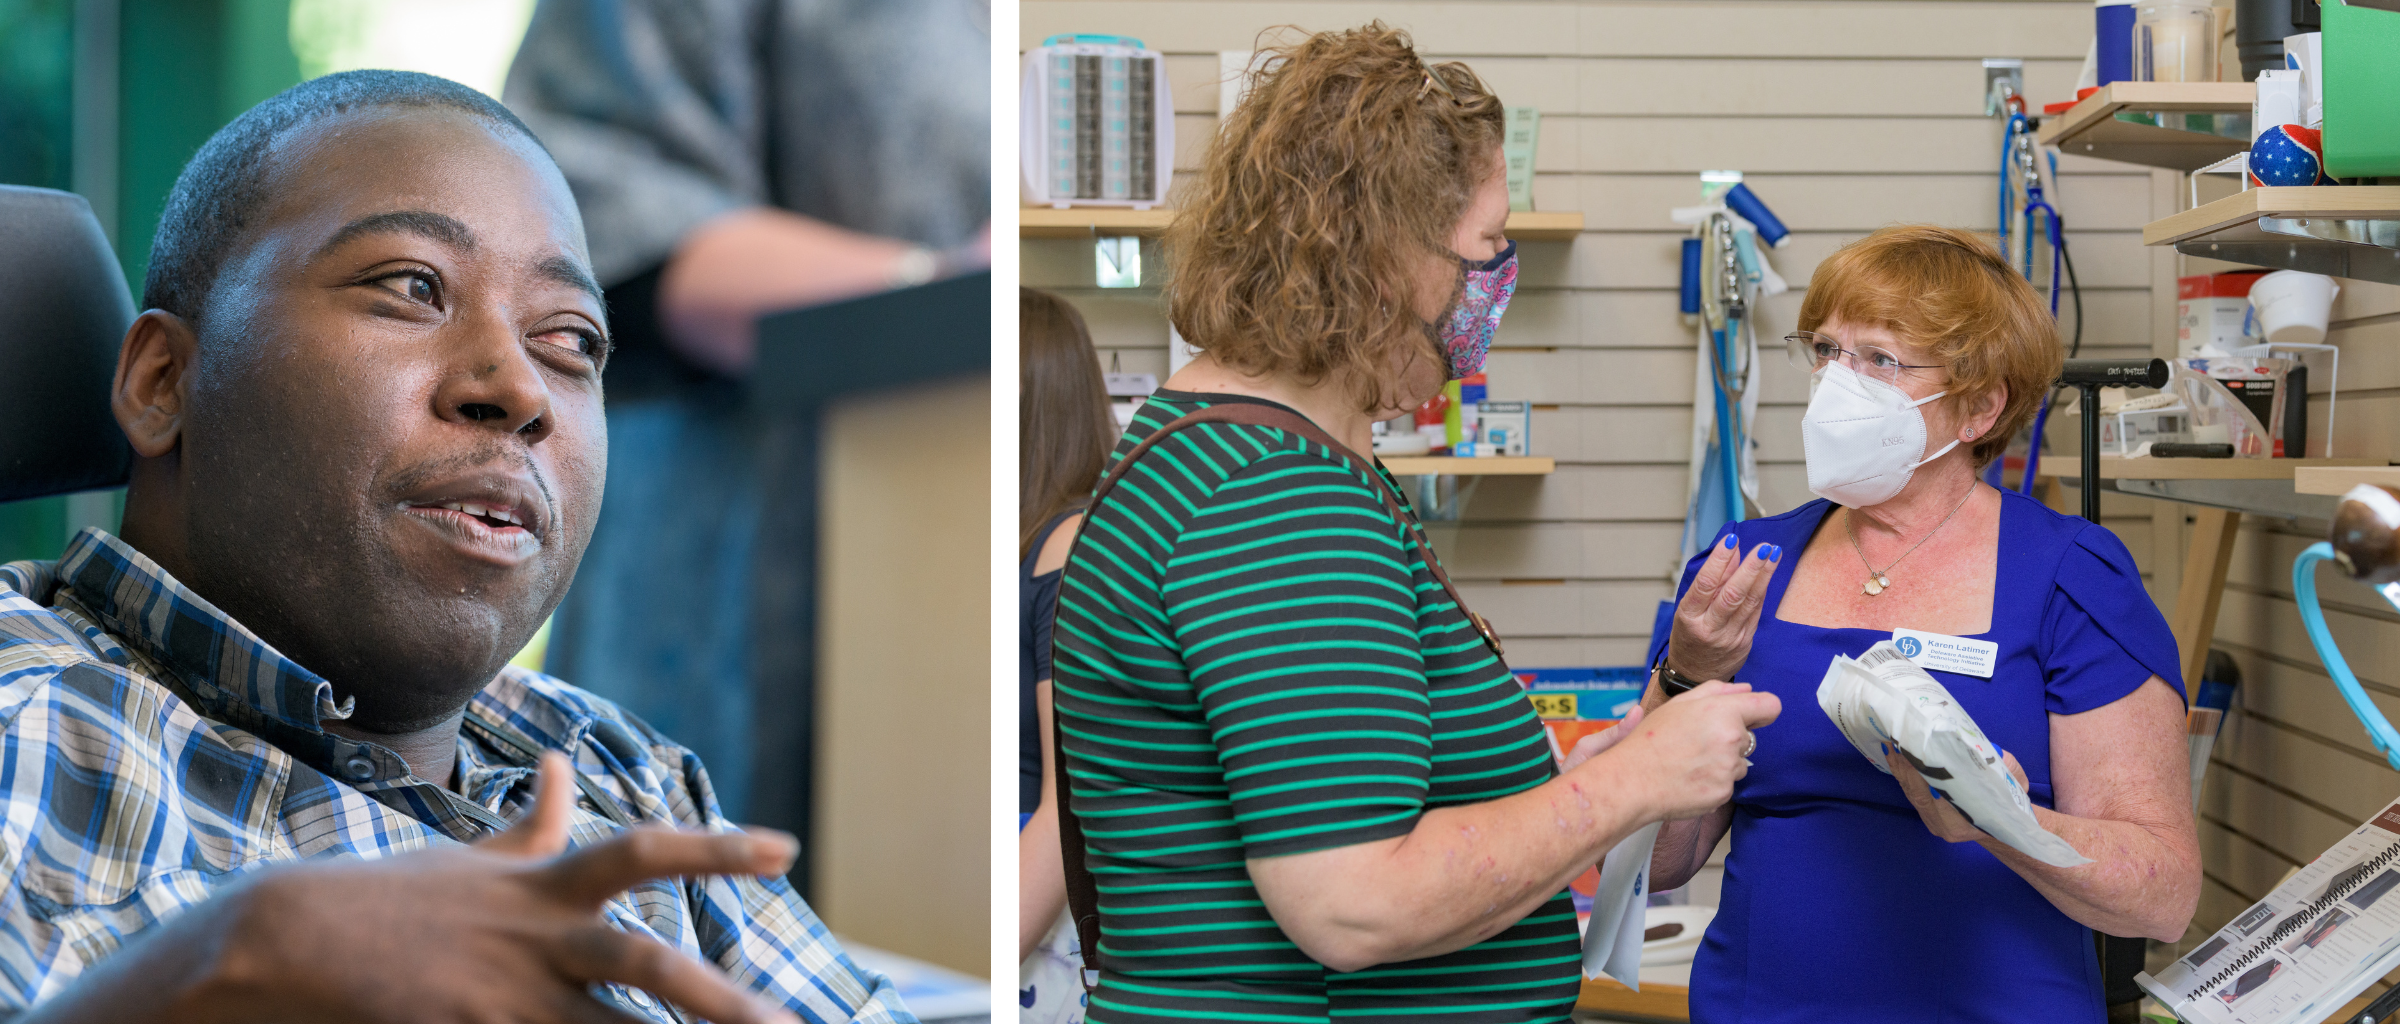 Collage. Photo on left is of Emmanuel Jenkins in a powerchair. He wears a plaid shirt and gestures while speaking. On the right, Karen Latimer and Amy Morten discuss technology options inside the Kent/Sussex Assistive Technology Resource Center.